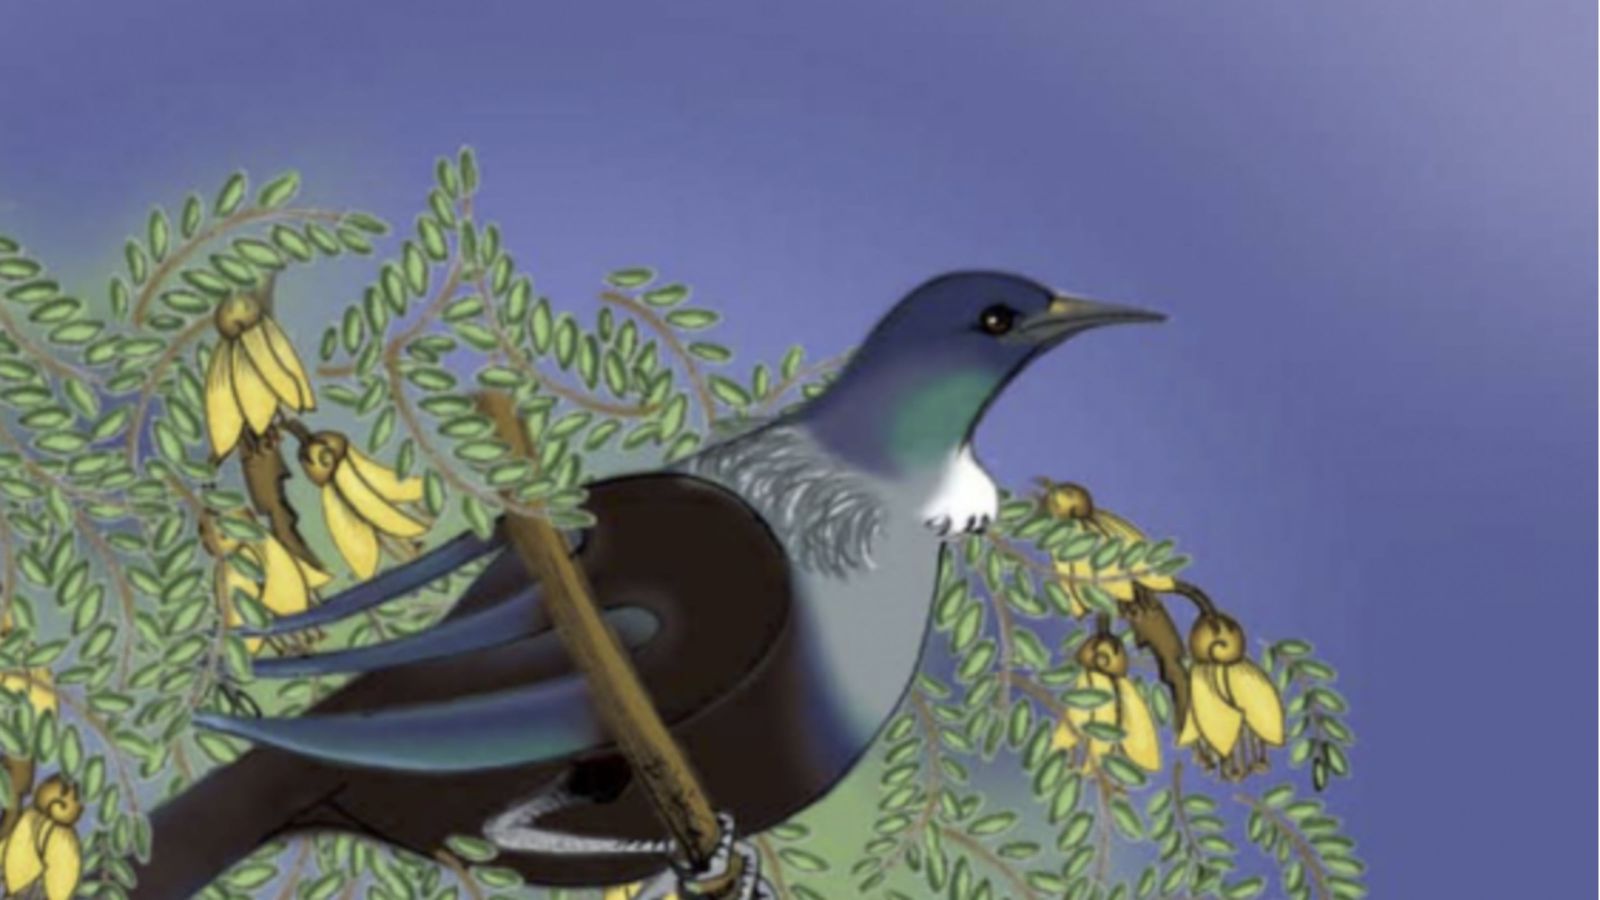 An animated image with a bird on a tree branch in front of a purple background. 